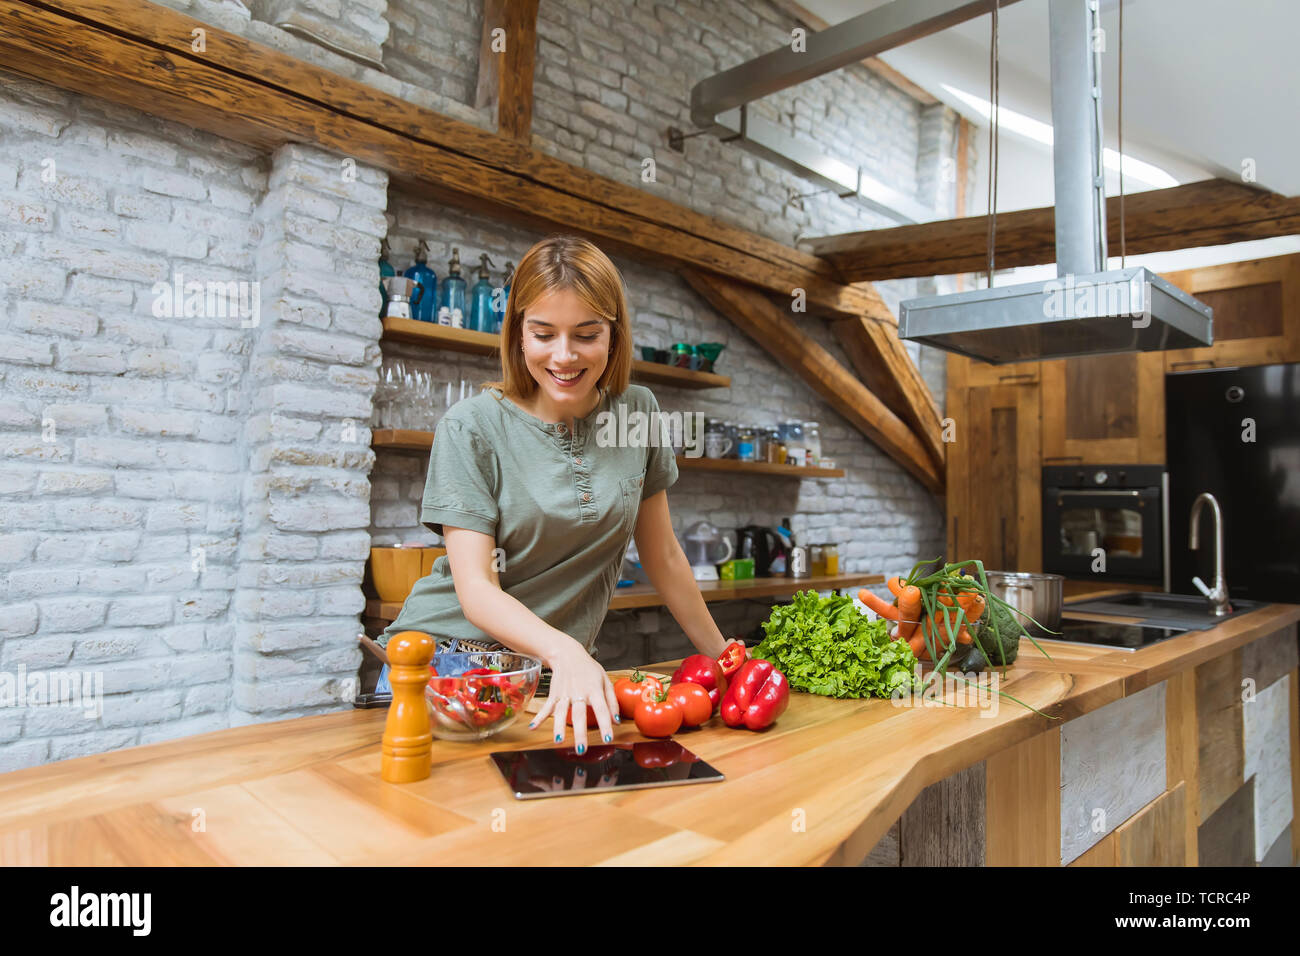 Young woman preparing food in the rustic kitchen while using digital tablet Stock Photo